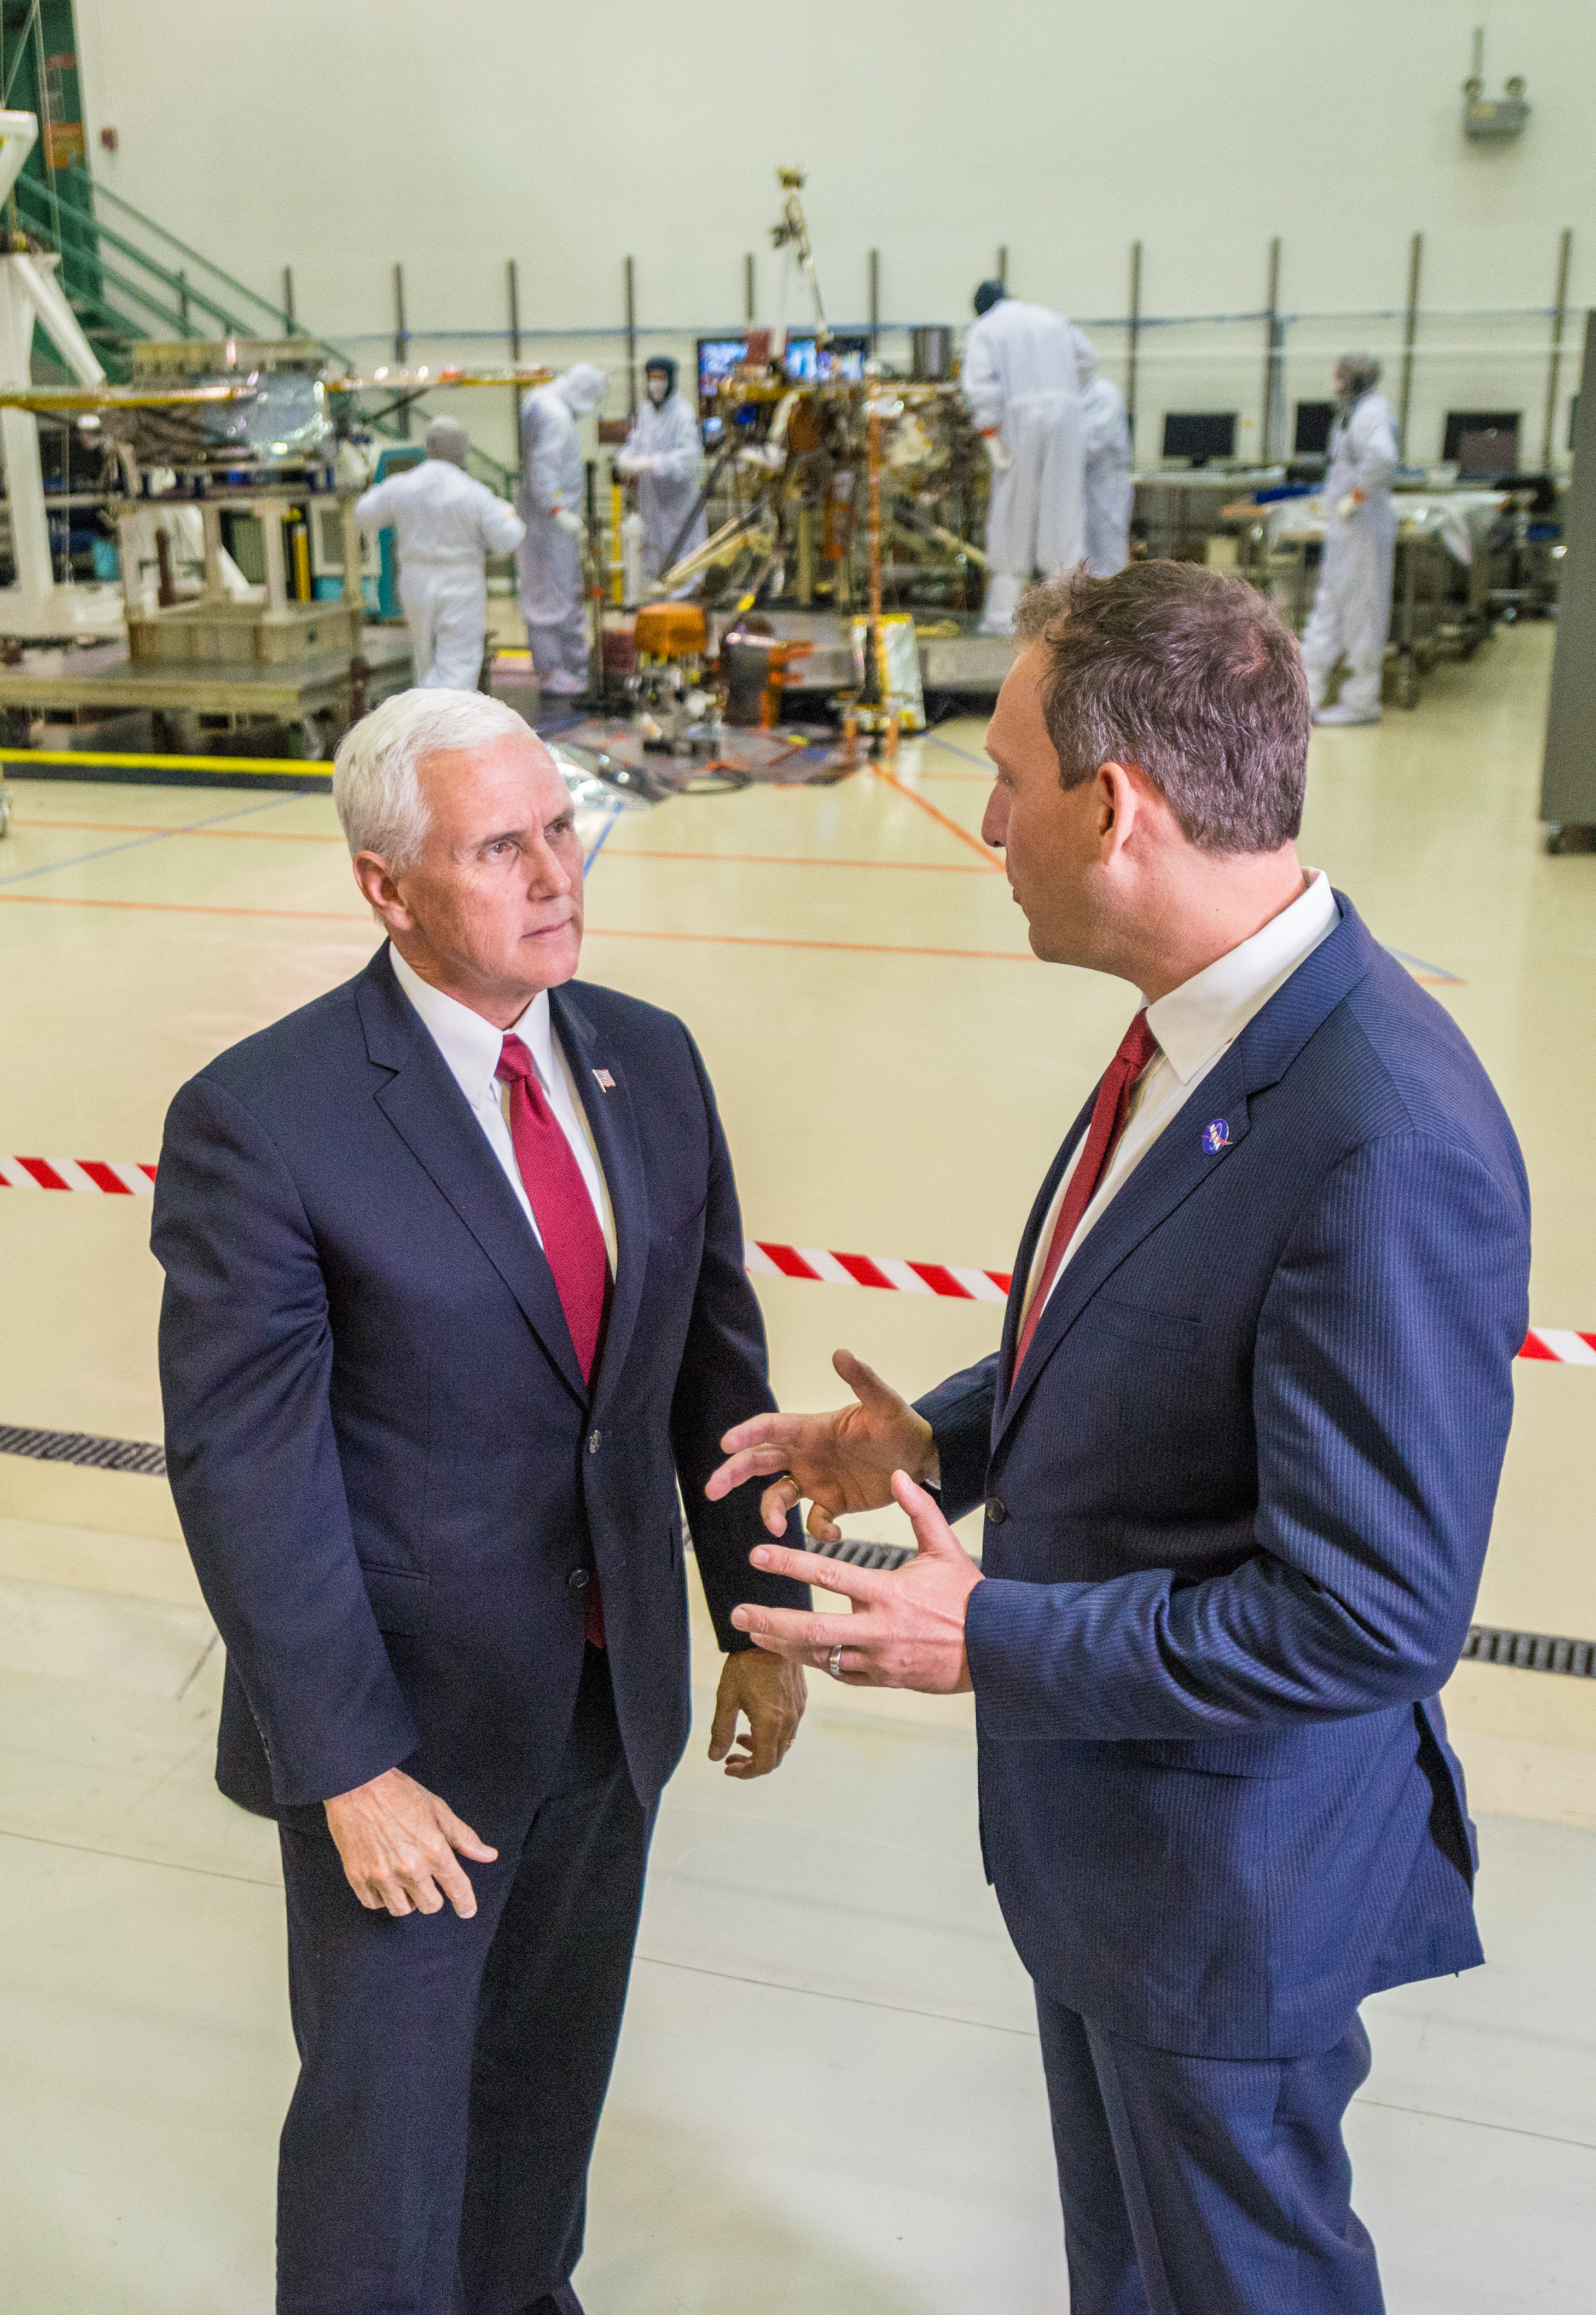 Vice President Mike Pence, left, speaks with Thomas Zurbuchen, NASA's associate administrator for the Science Mission Directorate, right, in a clean room facility near Denver, Colorado, where Lockheed Martin Space Systems is assembling and testing InSight, NASA's next spacecraft to Mars.